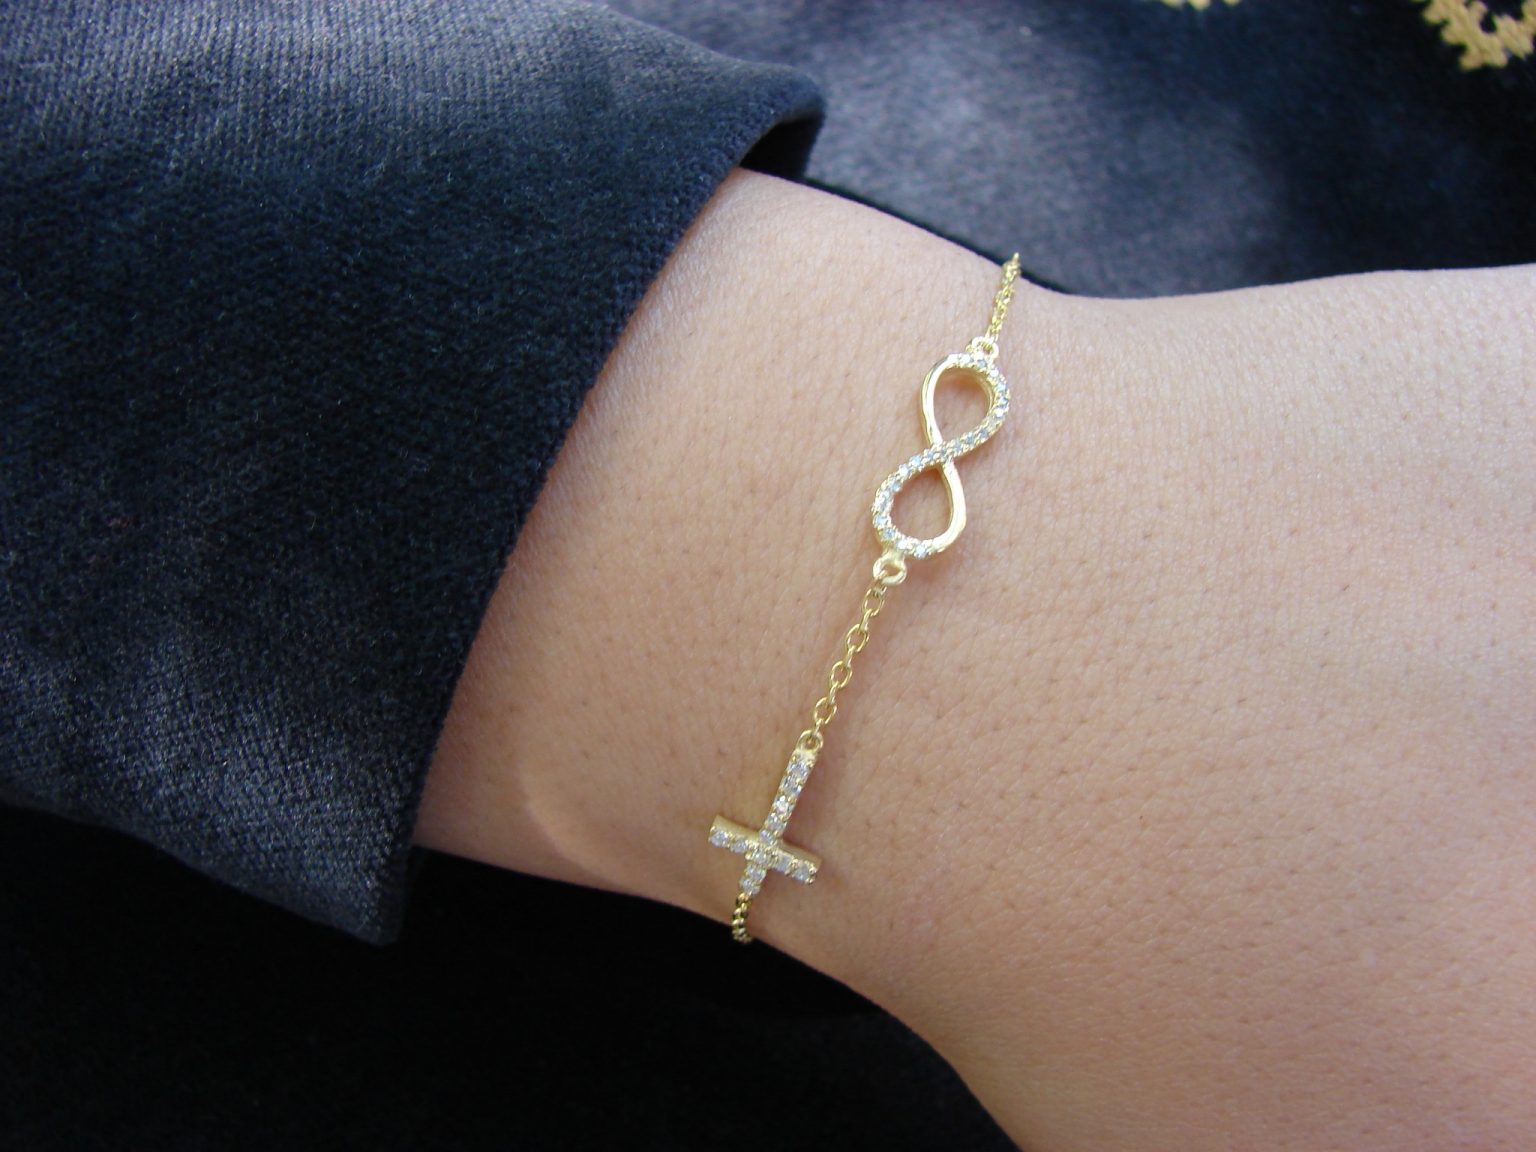 Bracelet Infinity Gold Plated Sterling Silver 925, Delicate Chain and Cross